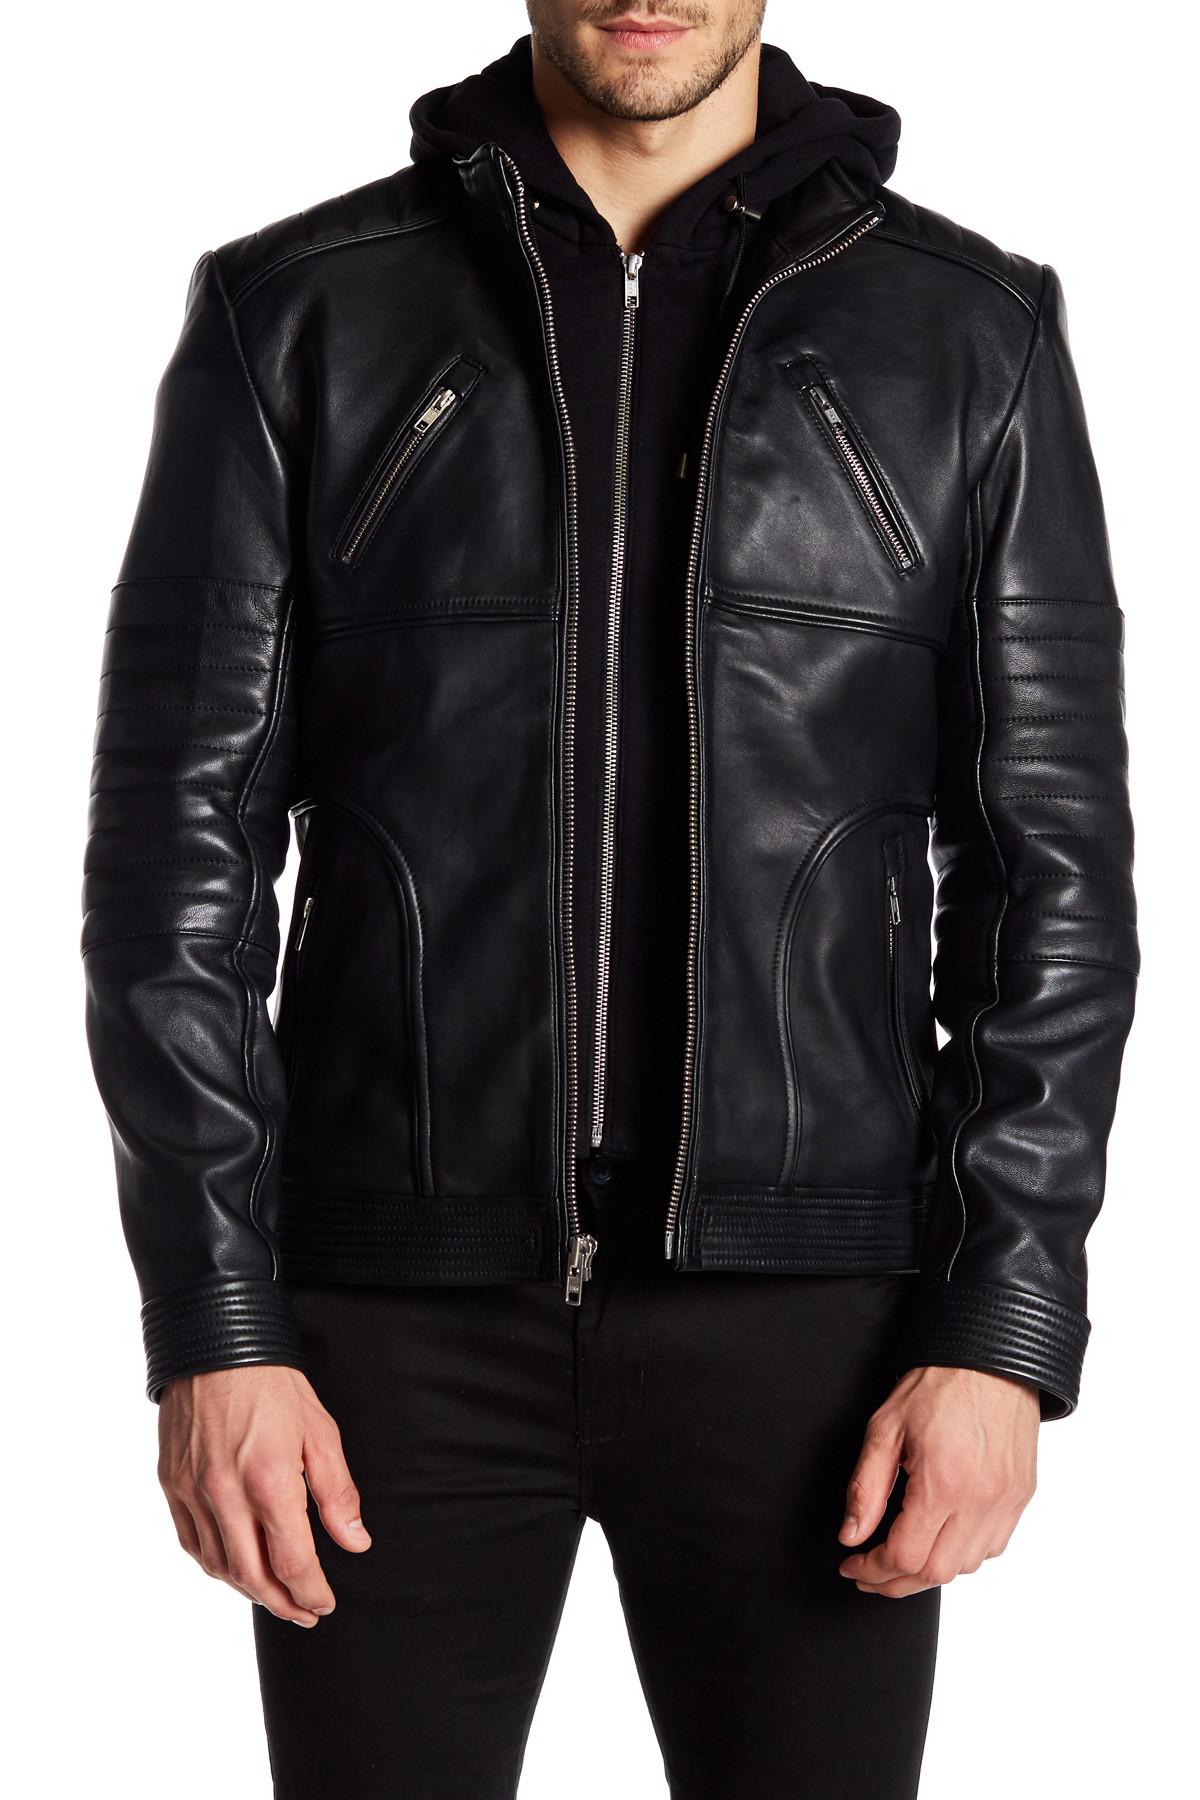 Lamarque Leather Hooded Jacket in Black for Men - Lyst